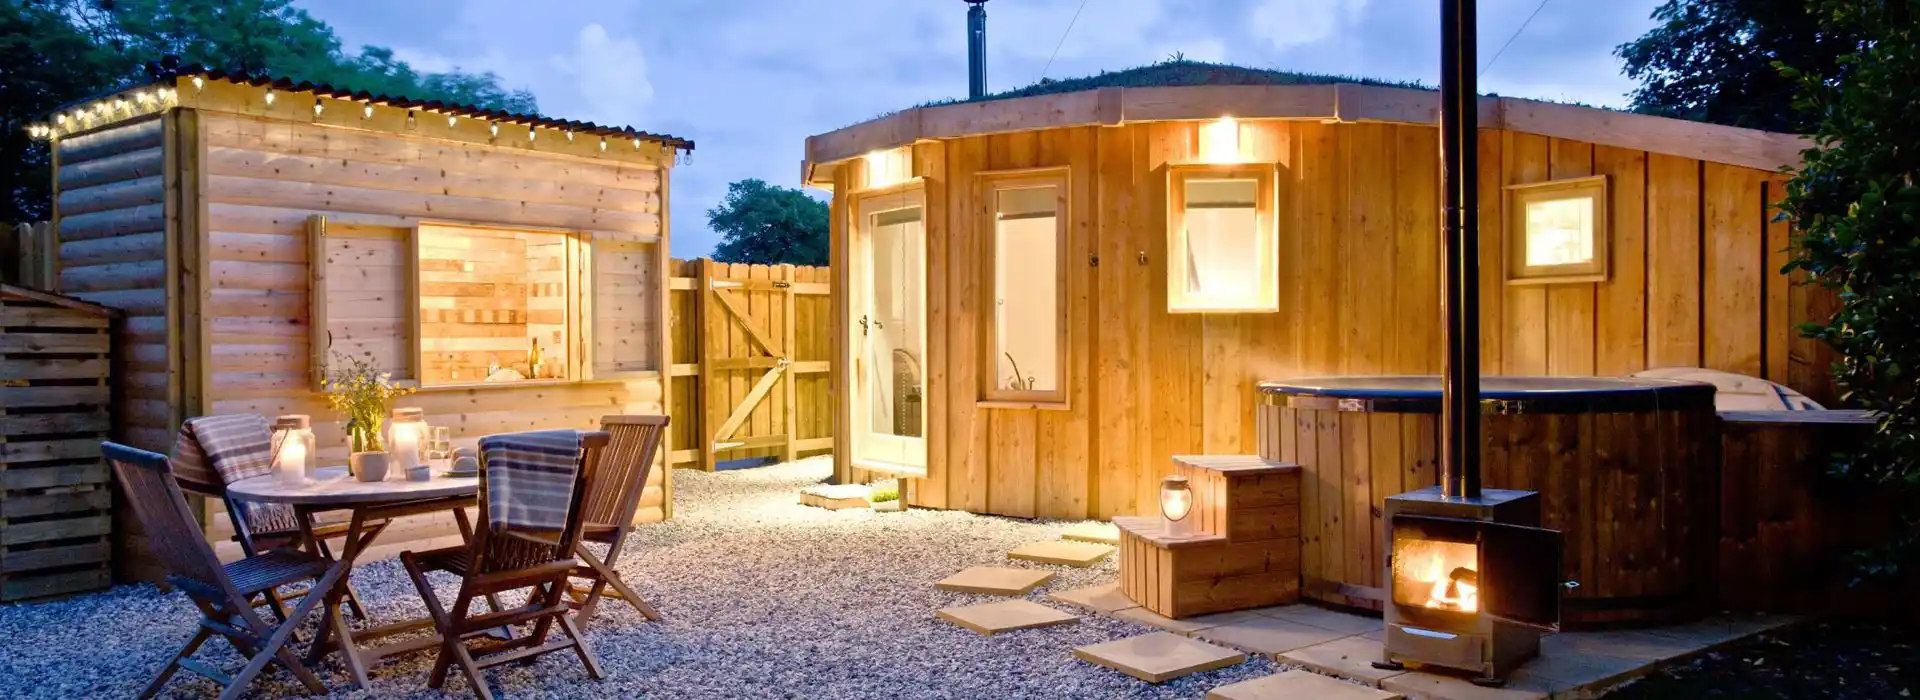 Best glamping sites in the UK